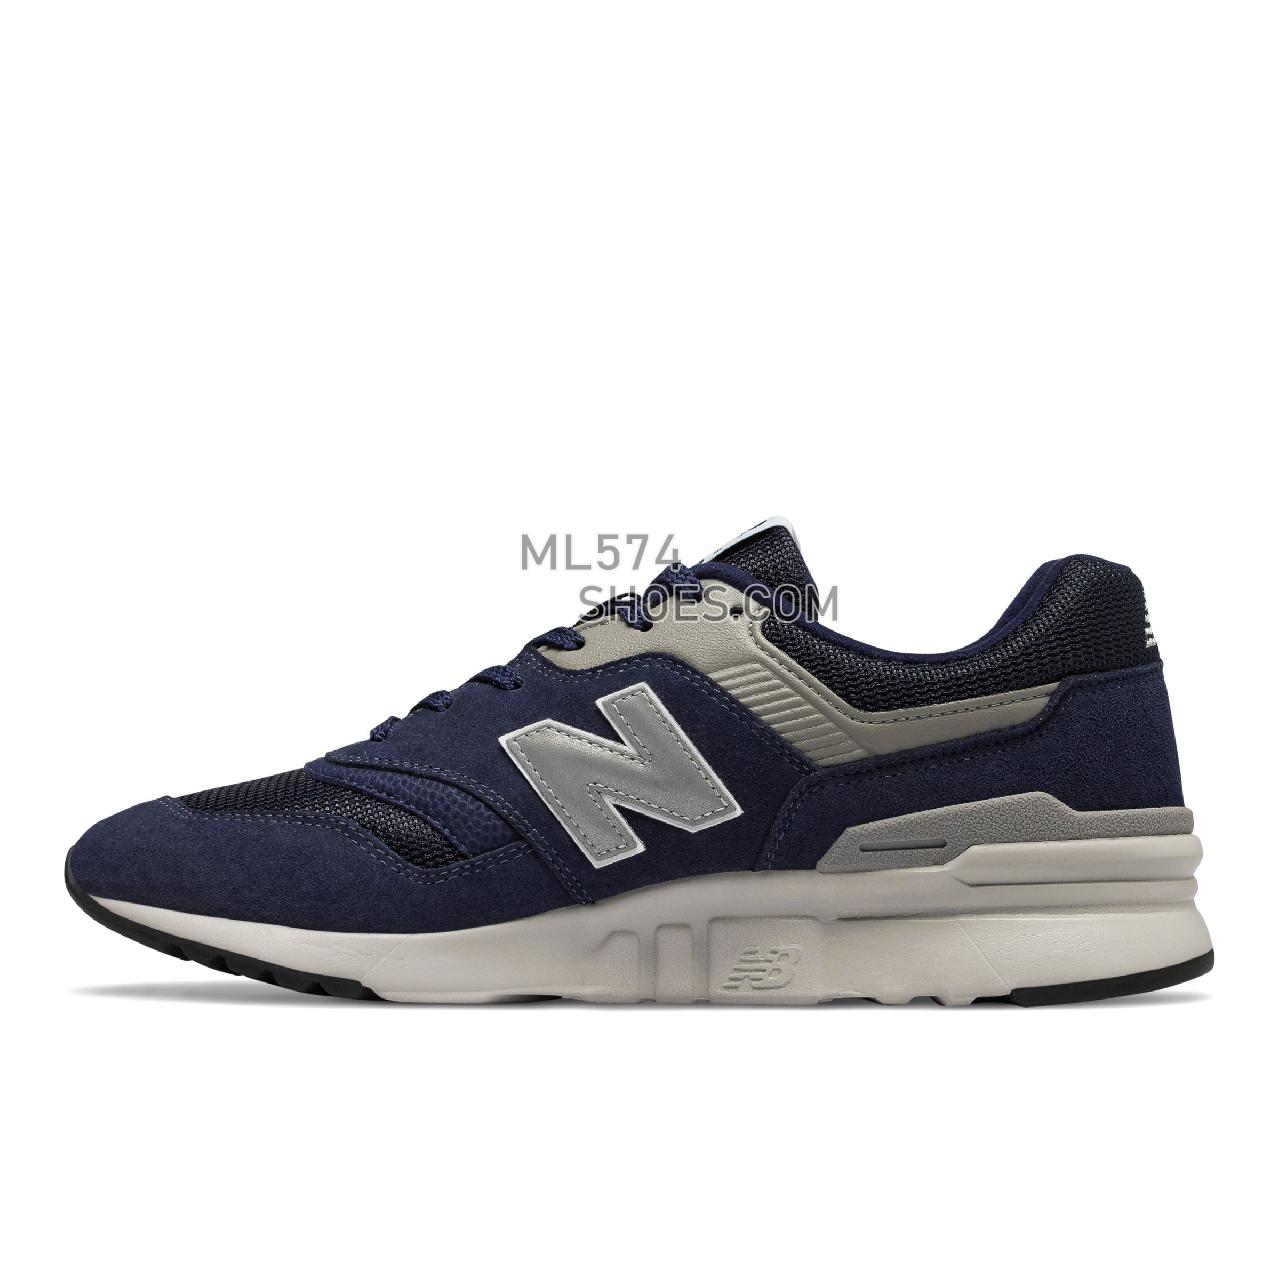 New Balance 997H - Men's Sport Style Sneakers - Pigment with Silver - CM997HCE